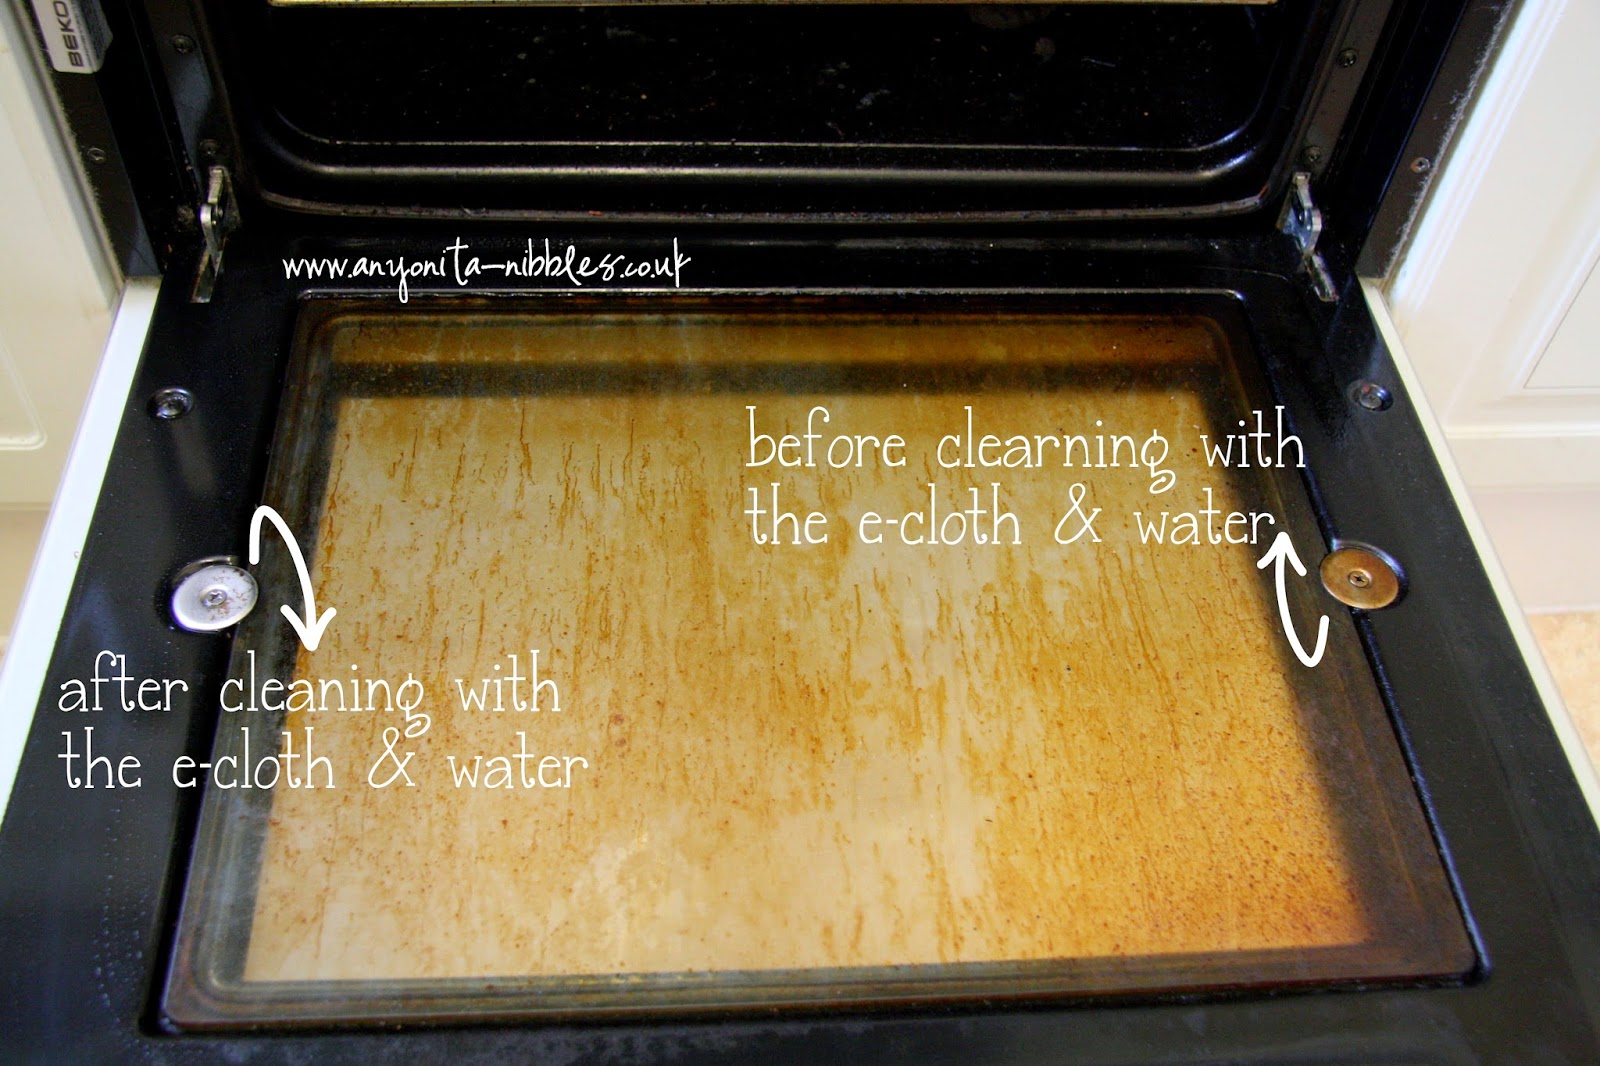 Check out the after! She achieved this without any harsh chemical! #home #diy #cleaning